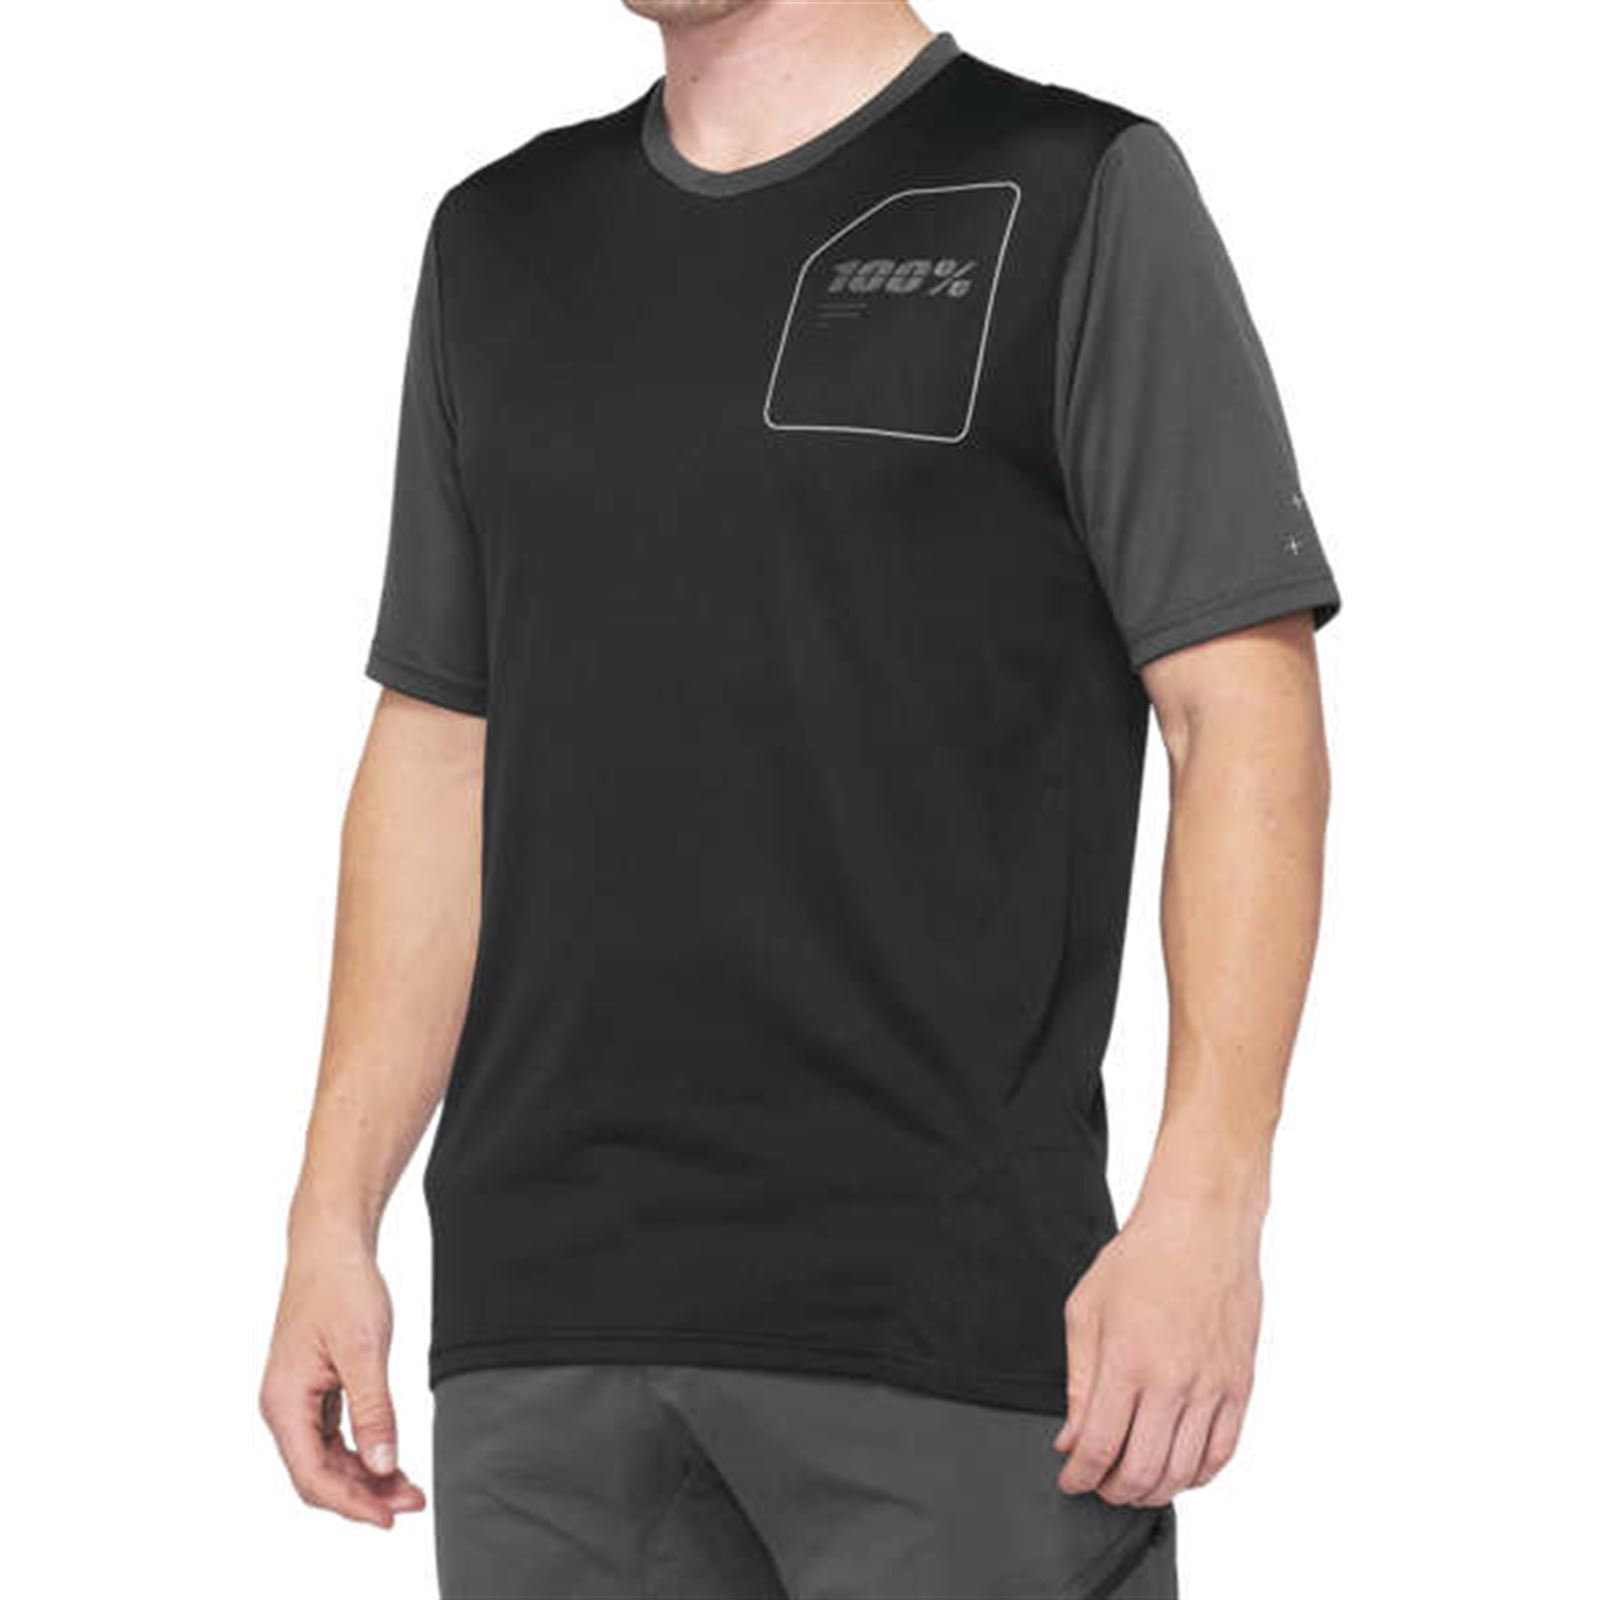 100% Ridecamp Jersey - Charcoal/Black - Small